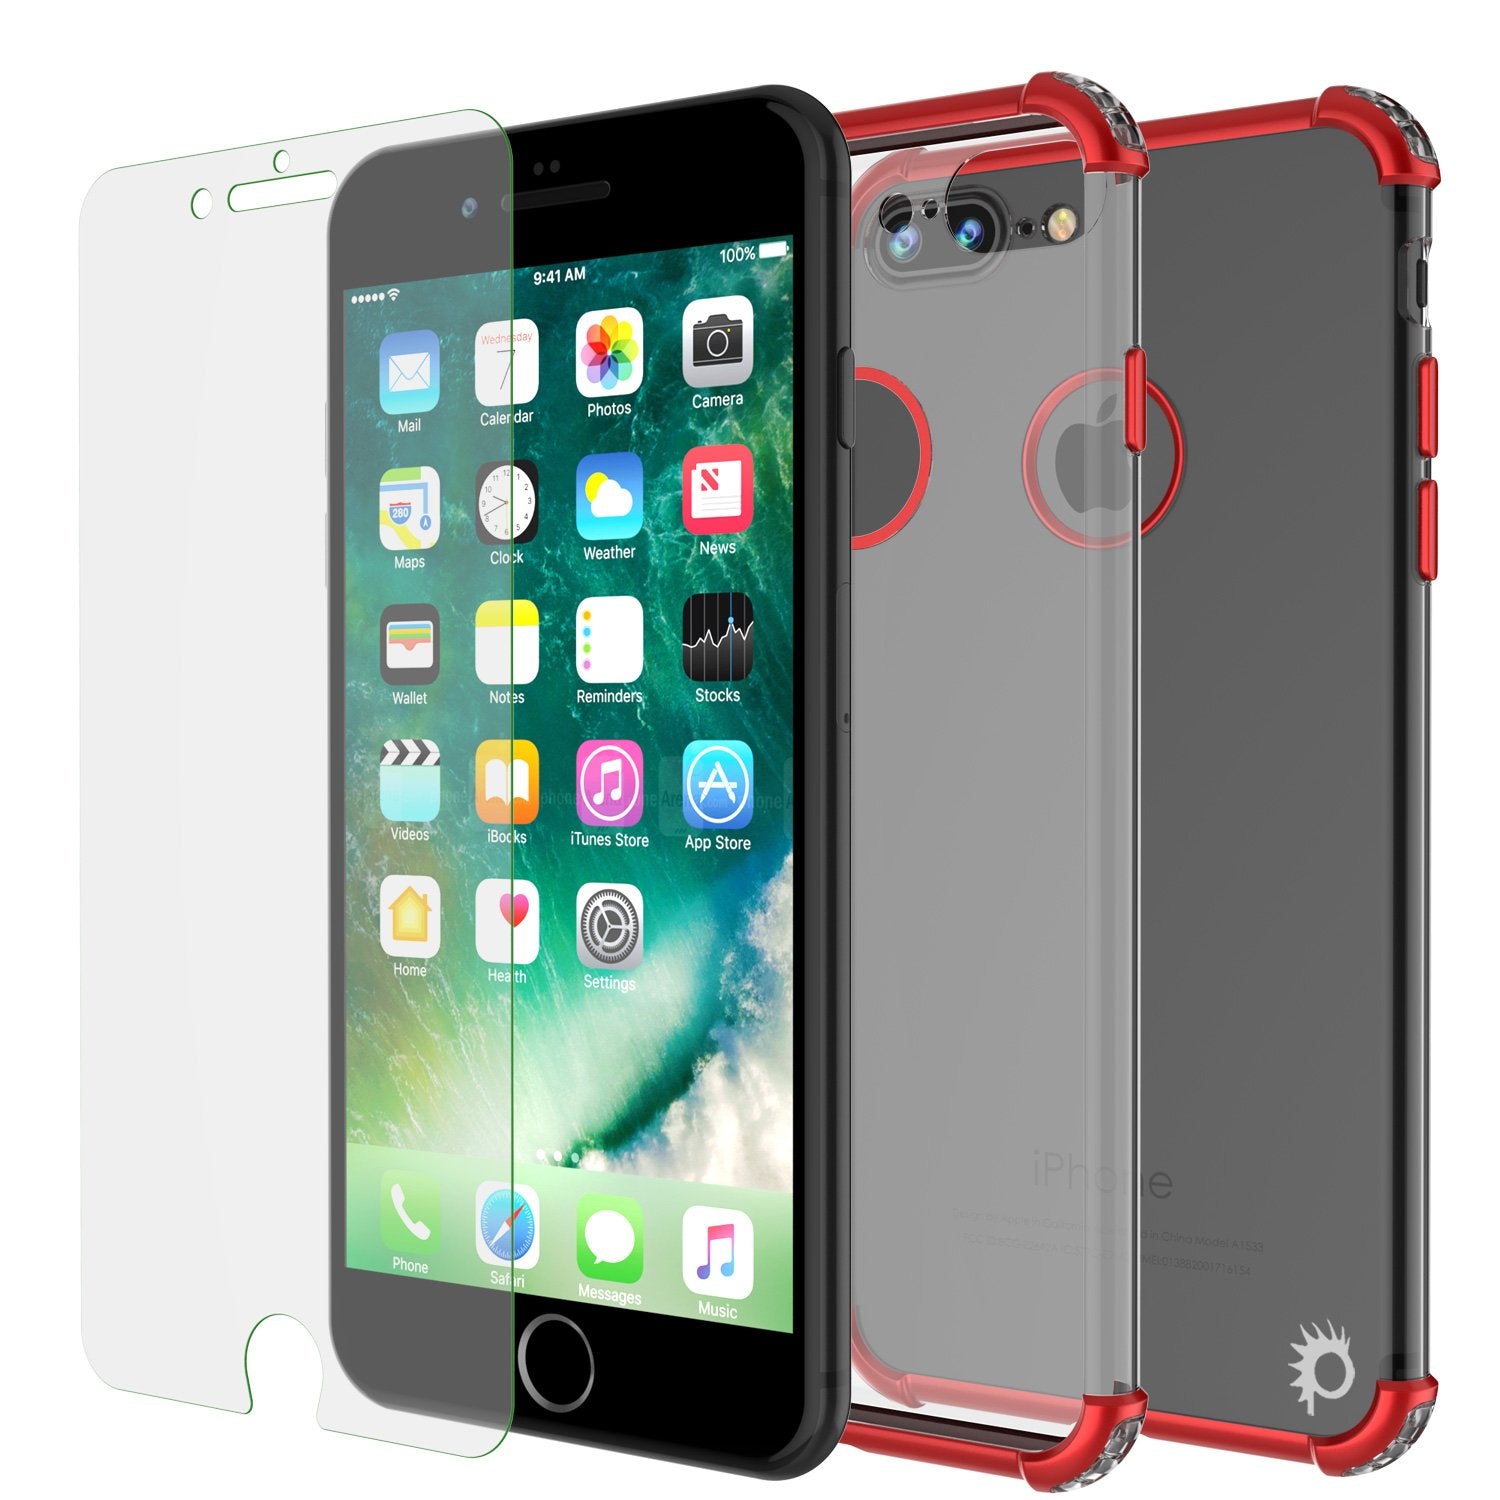 iPhone 7 PLUS Case, Punkcase [BLAZE SERIES] Protective Cover W/ PunkShield Screen Protector [Shockproof] [Slim Fit] for Apple iPhone 7 PLUS [Red]